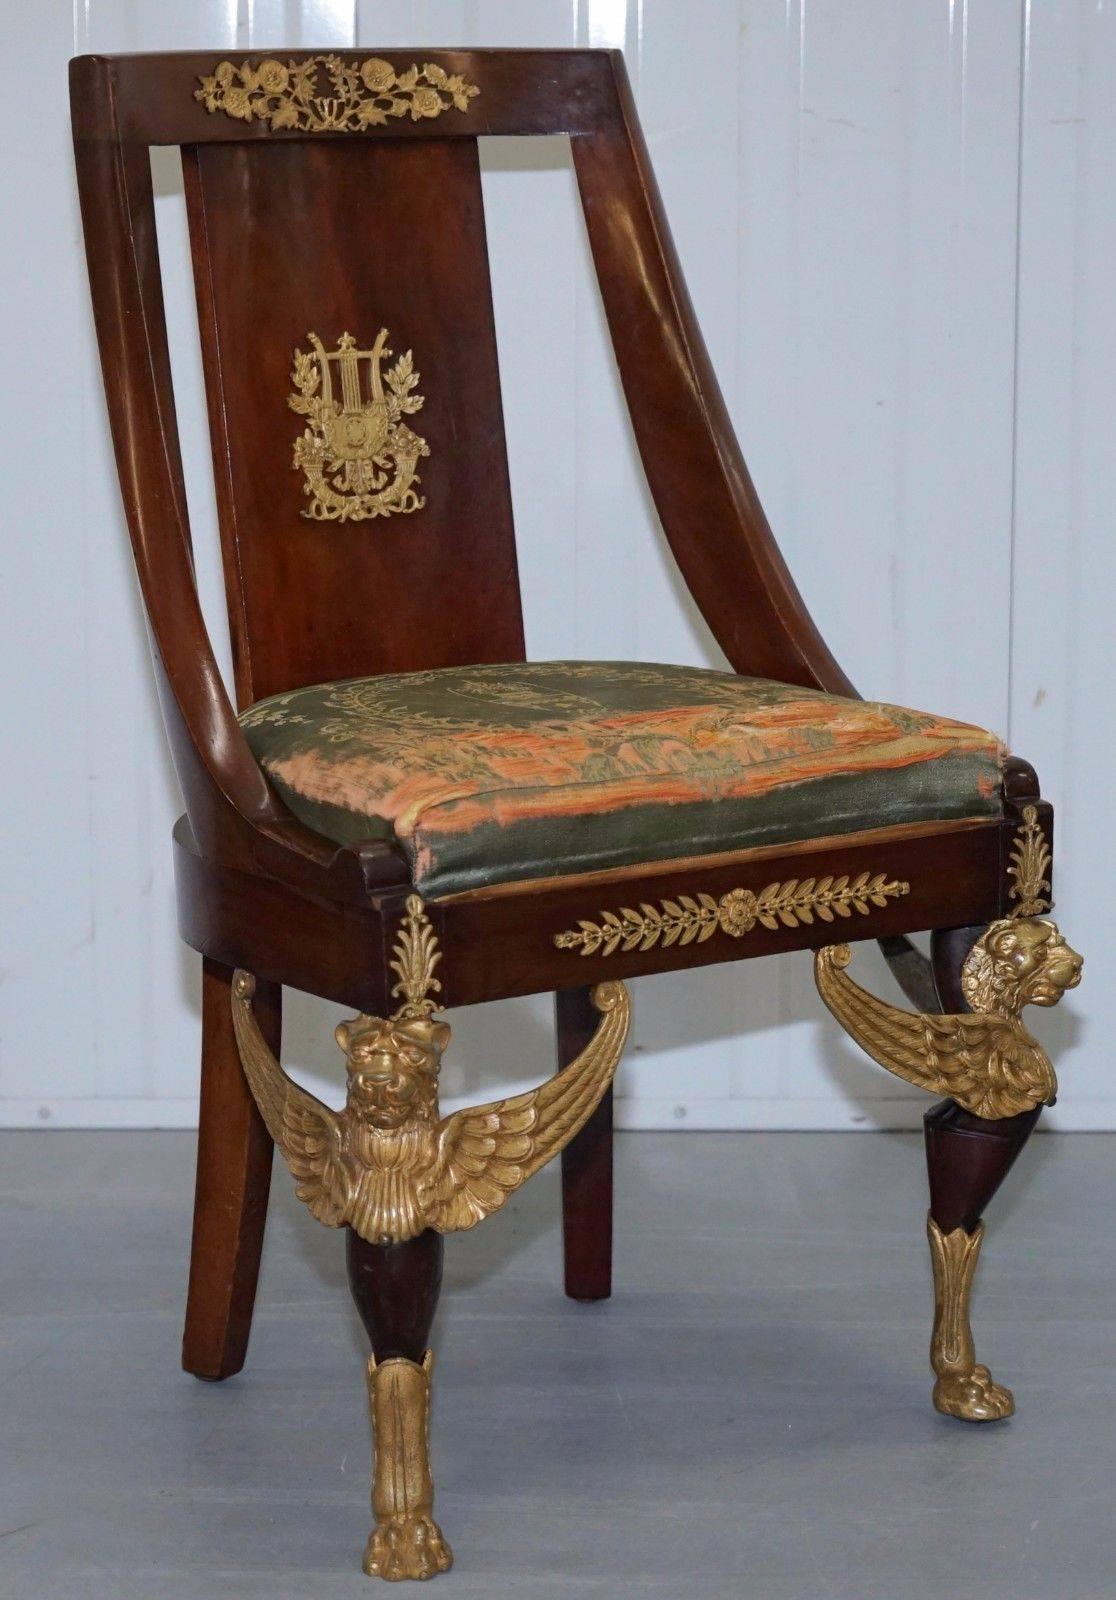 We are delighted to offer for sale this lovely pair of period Second Empire Sleigh back circa 1852 French mahogany chairs with gold ormolu Lion legs and original upholstery

A really rare pair in very desirable condition throughout, the upholstery